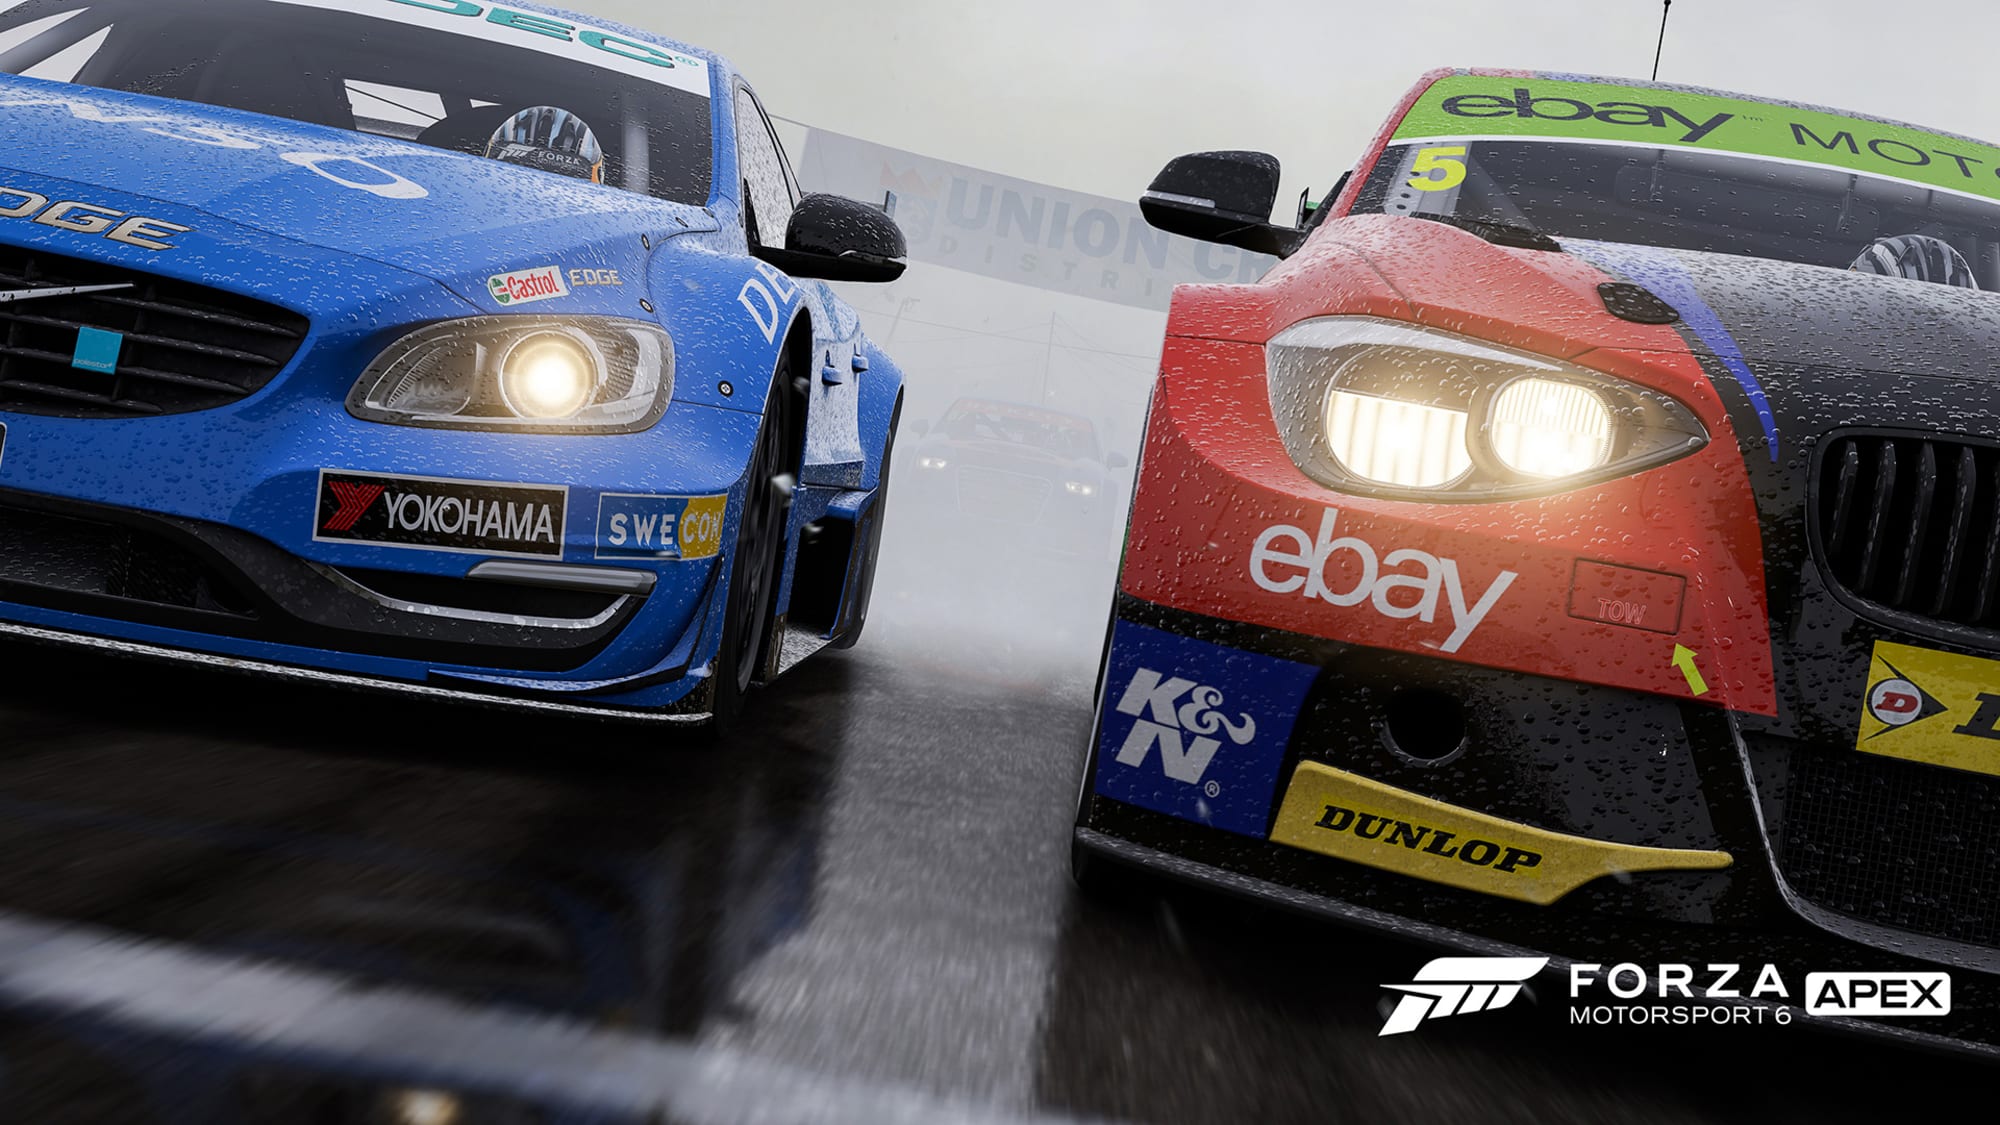 Country scan Alphabet Forza Motorsport 6: Apex Racing to Windows 10 PC's